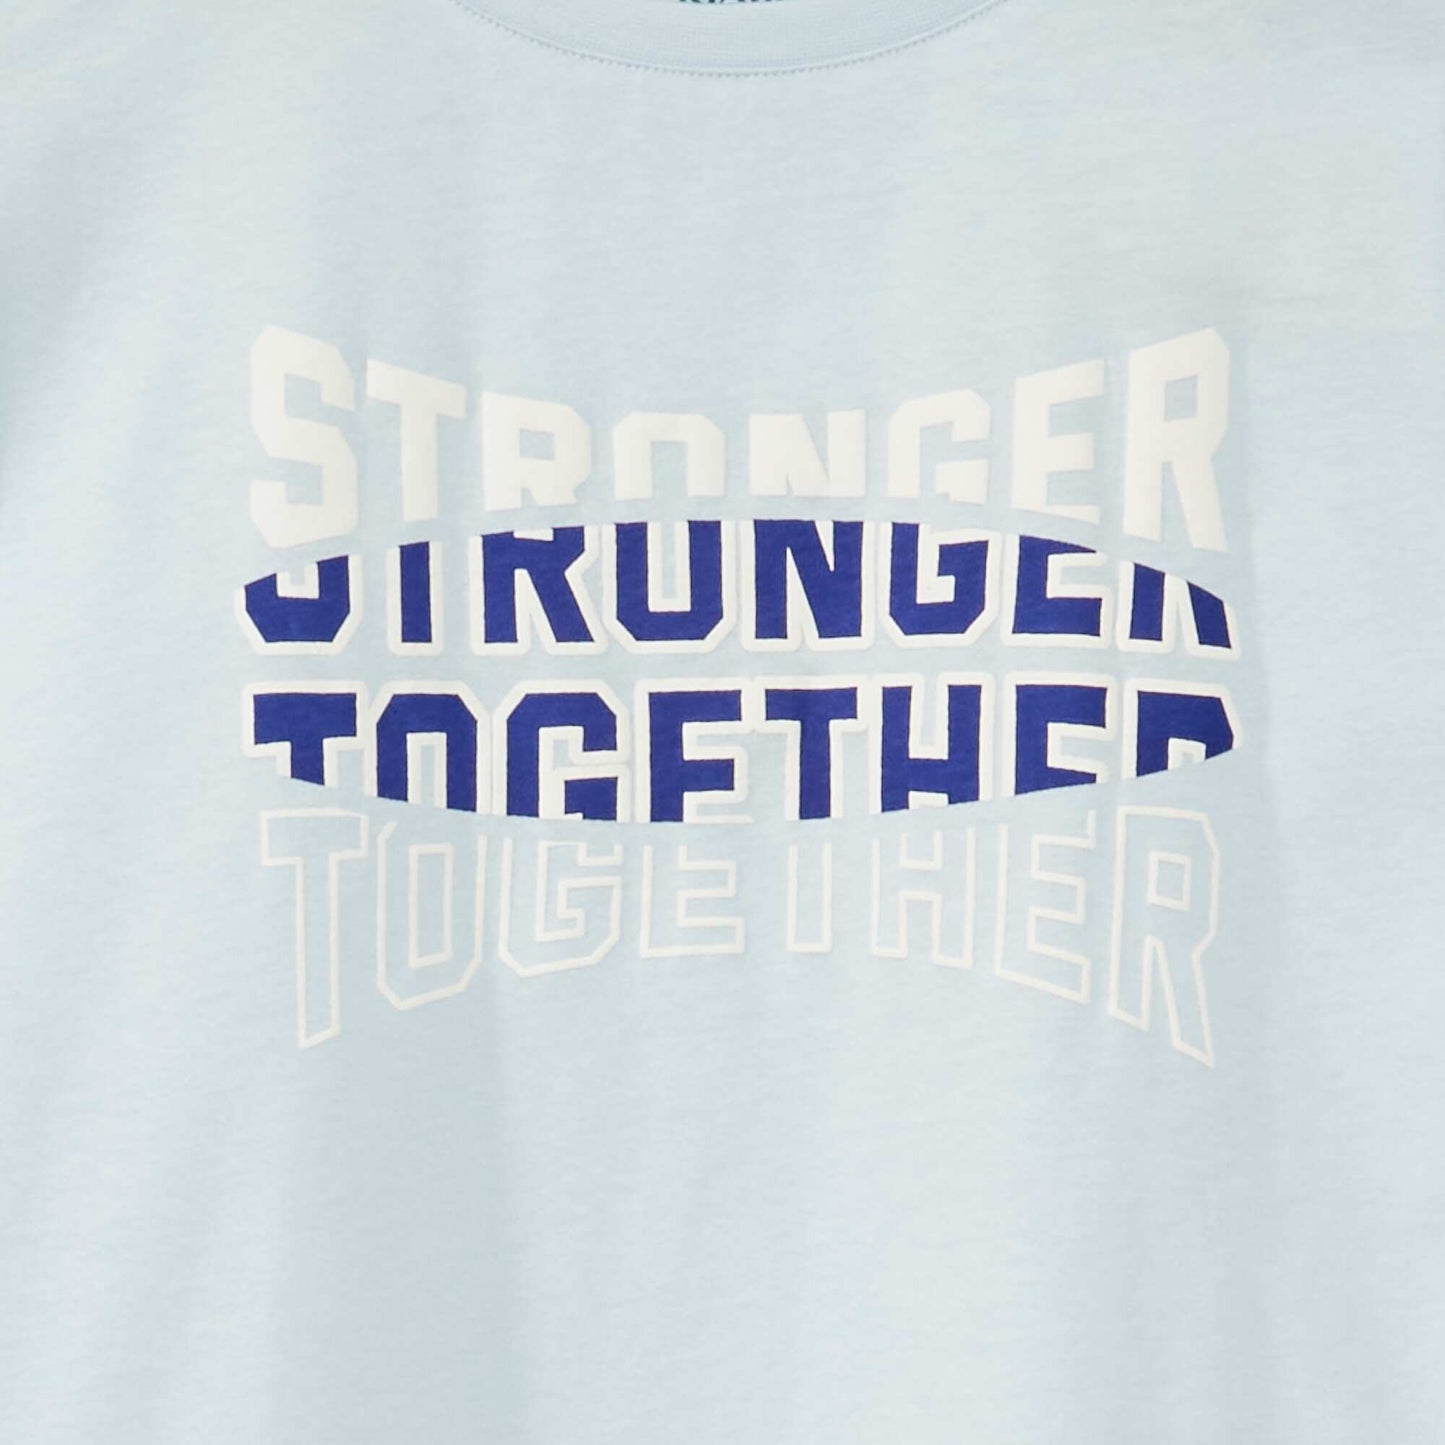 T-shirt with message BLUE